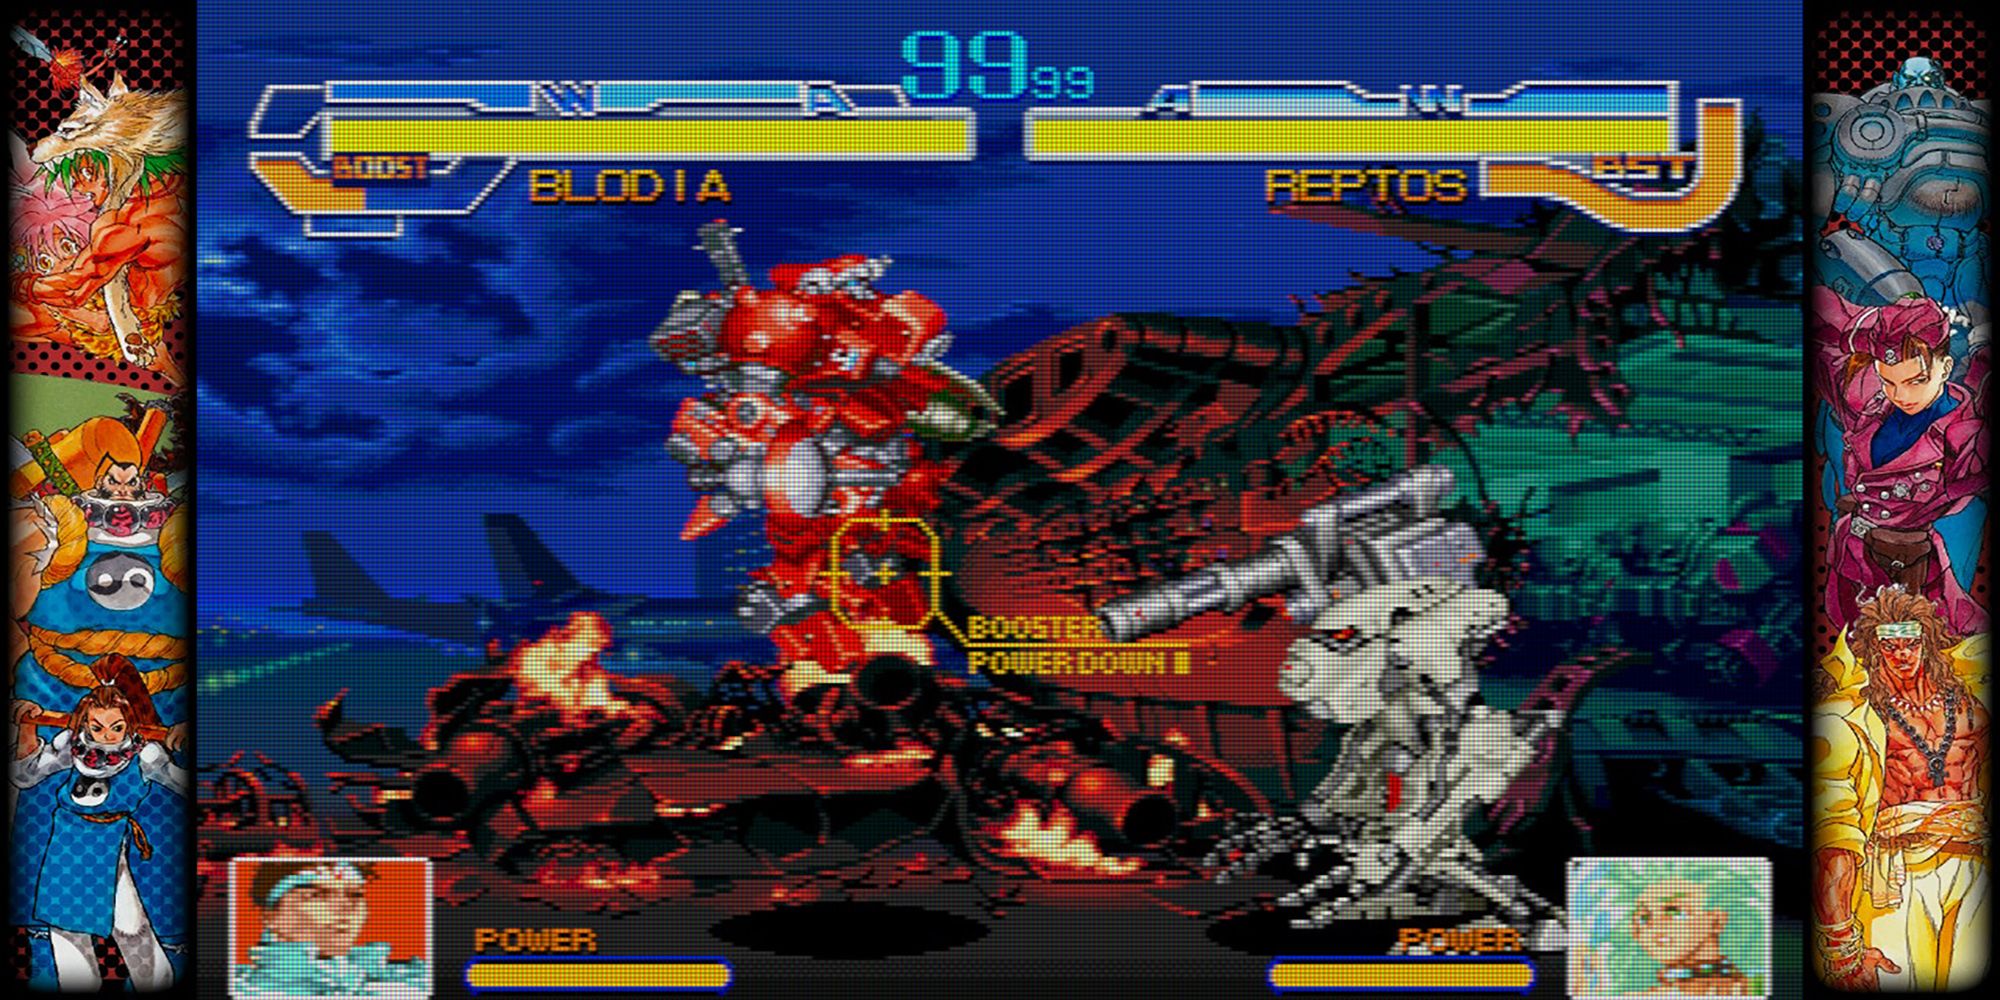 Blodia tricks Reptos with a short hop boost during a battle at an airport in Cyberbots, a game in Capcom Fighting Collection.